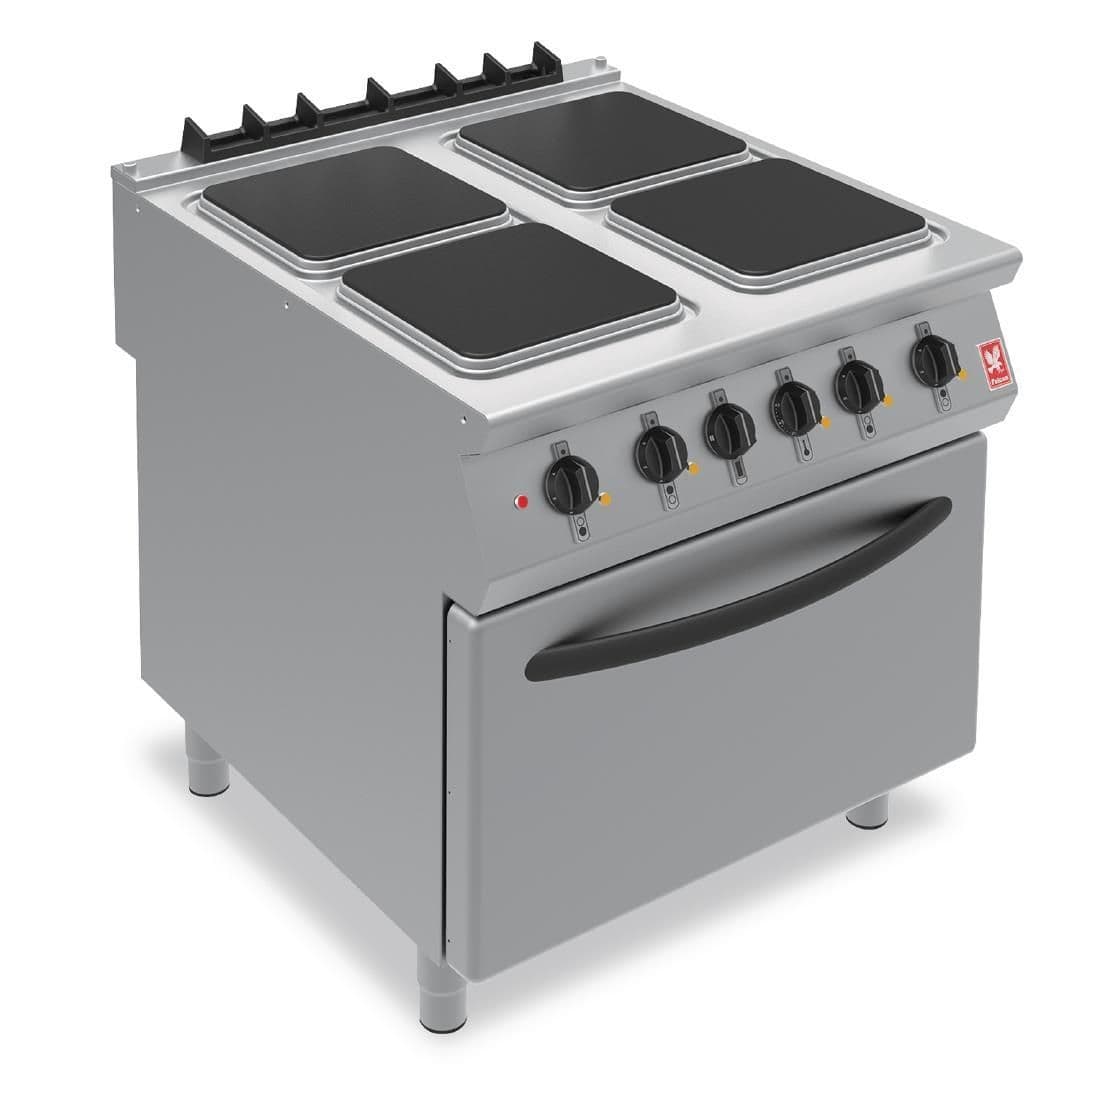 Falcon F900 Four Hotplate Electric Oven Range E9184 JD Catering Equipment Solutions Ltd